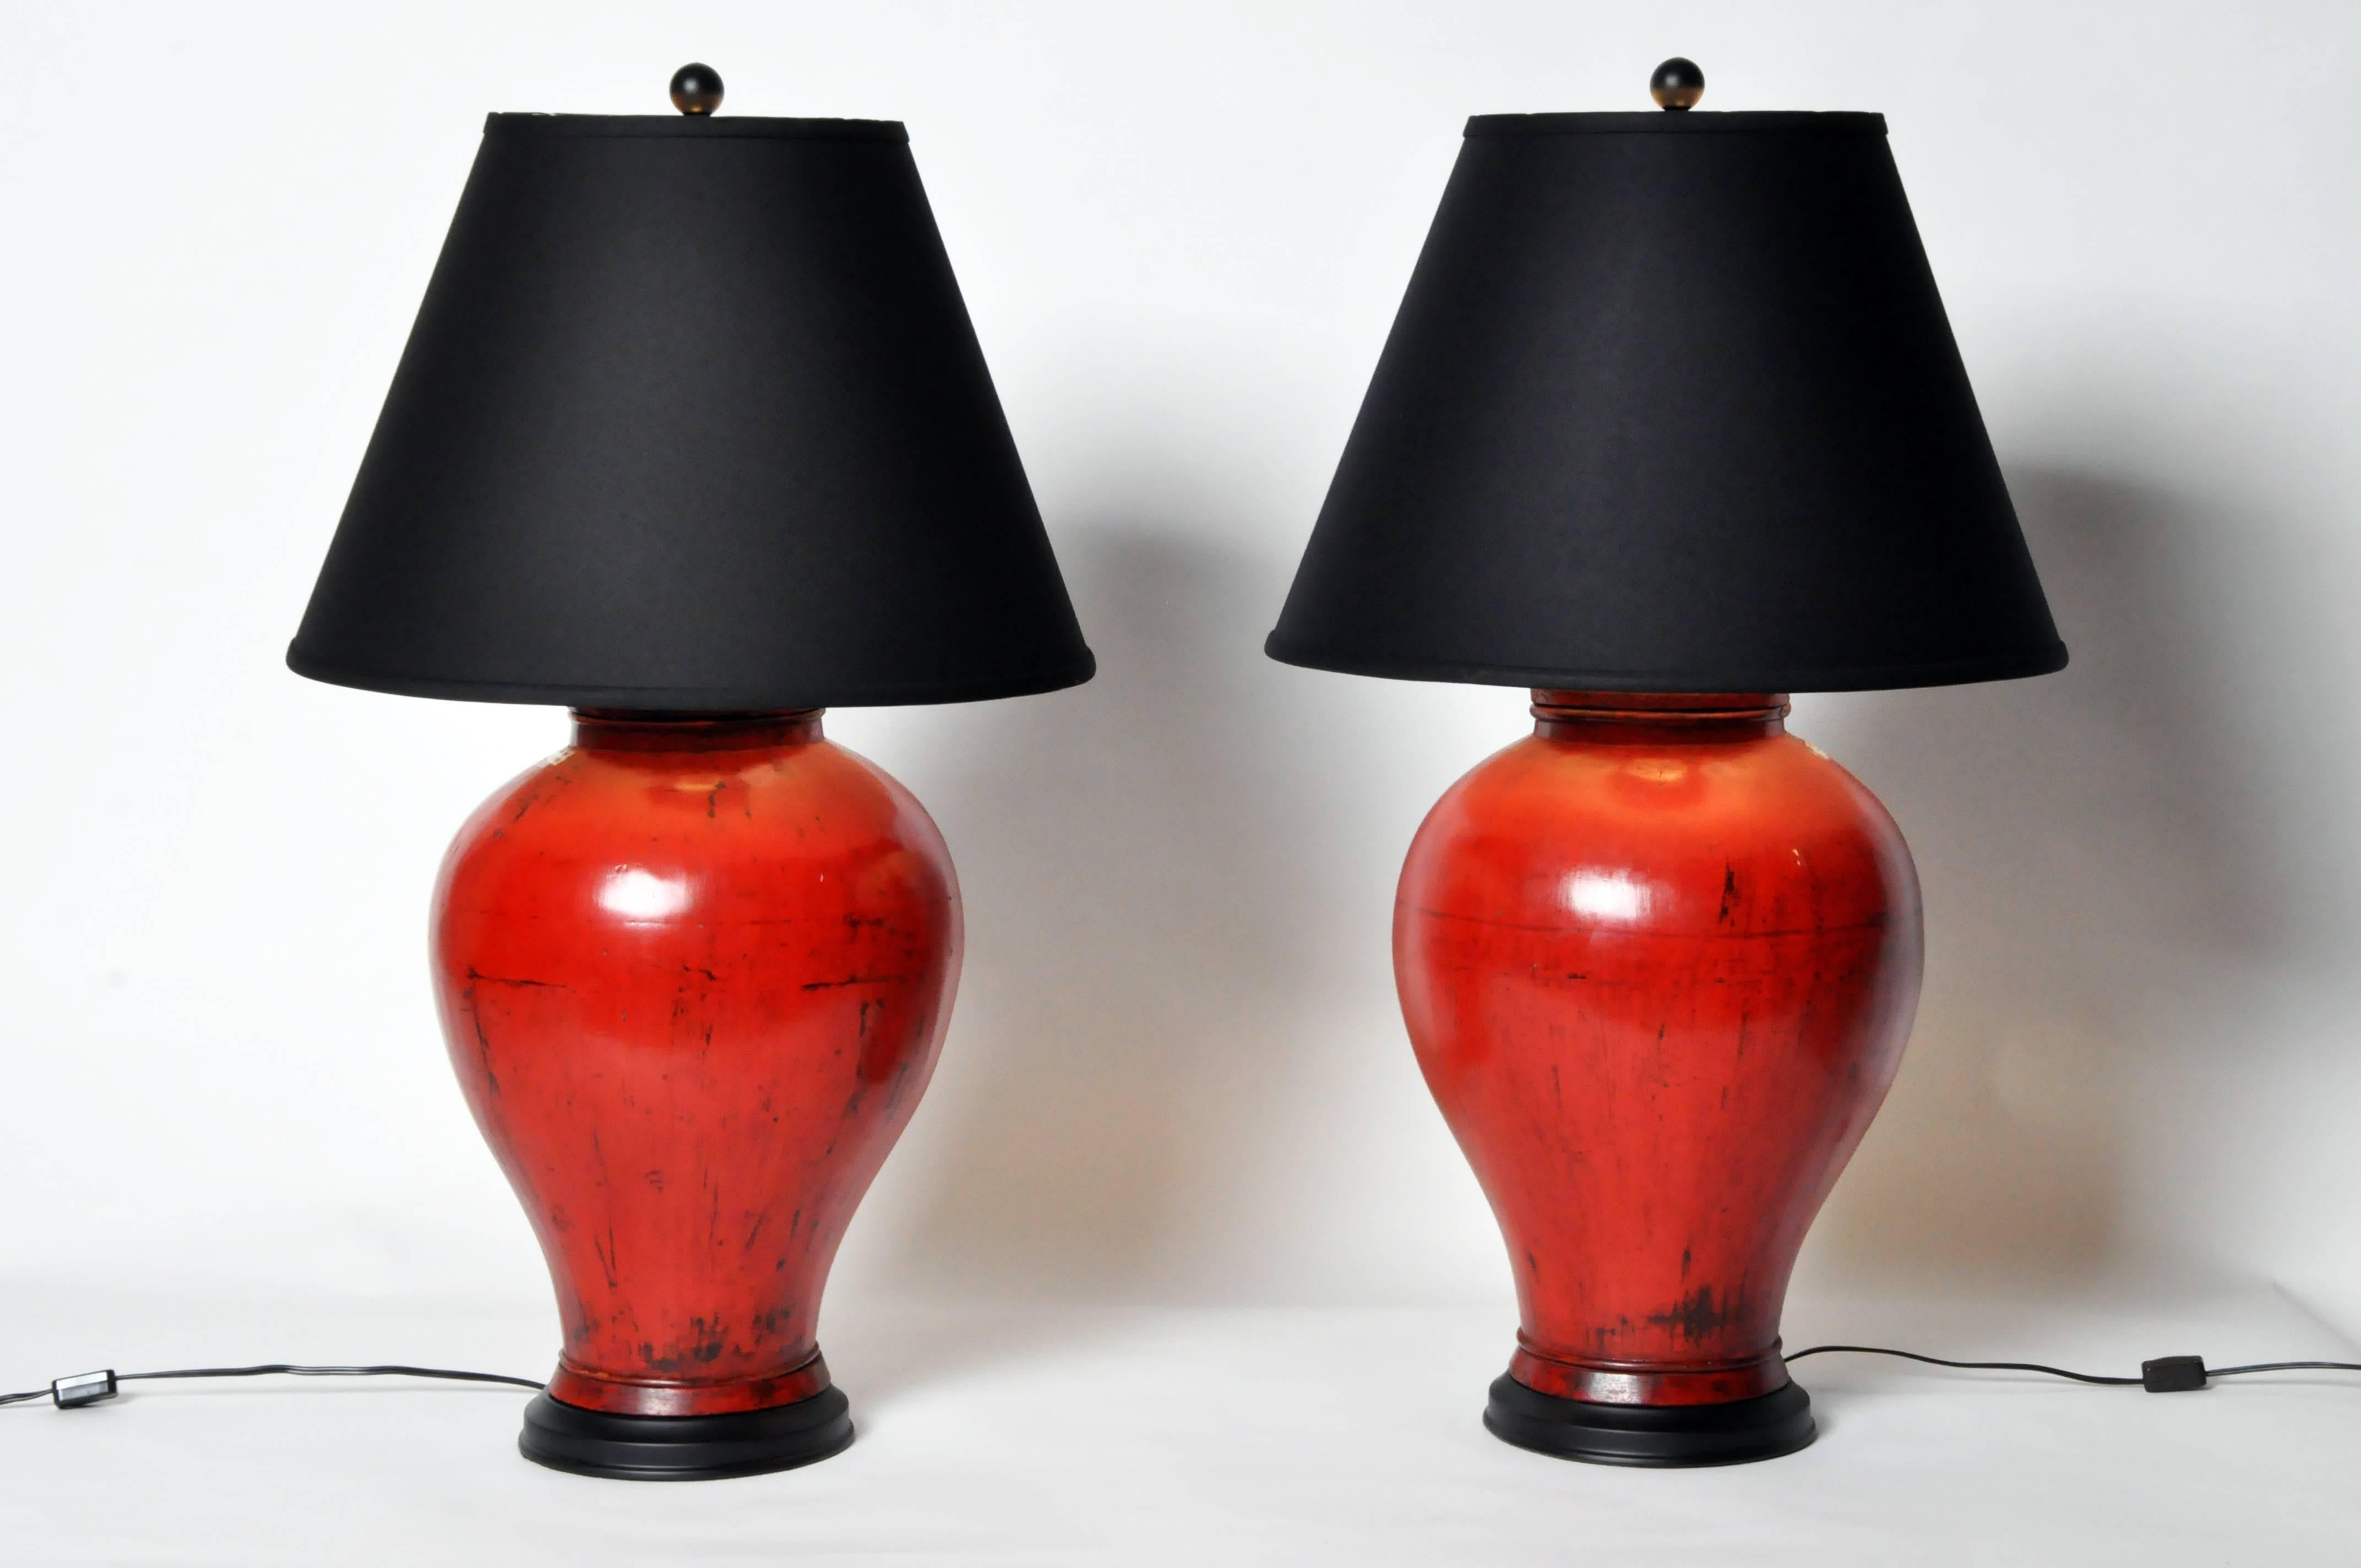 This handsome canister, with ovoid-form body that tapers to the foot, has been retrofitted by our workshop and transformed into a lamp. Shown in a pair for styling; each is sold individually and has its own unique deep, antiqued red finish.